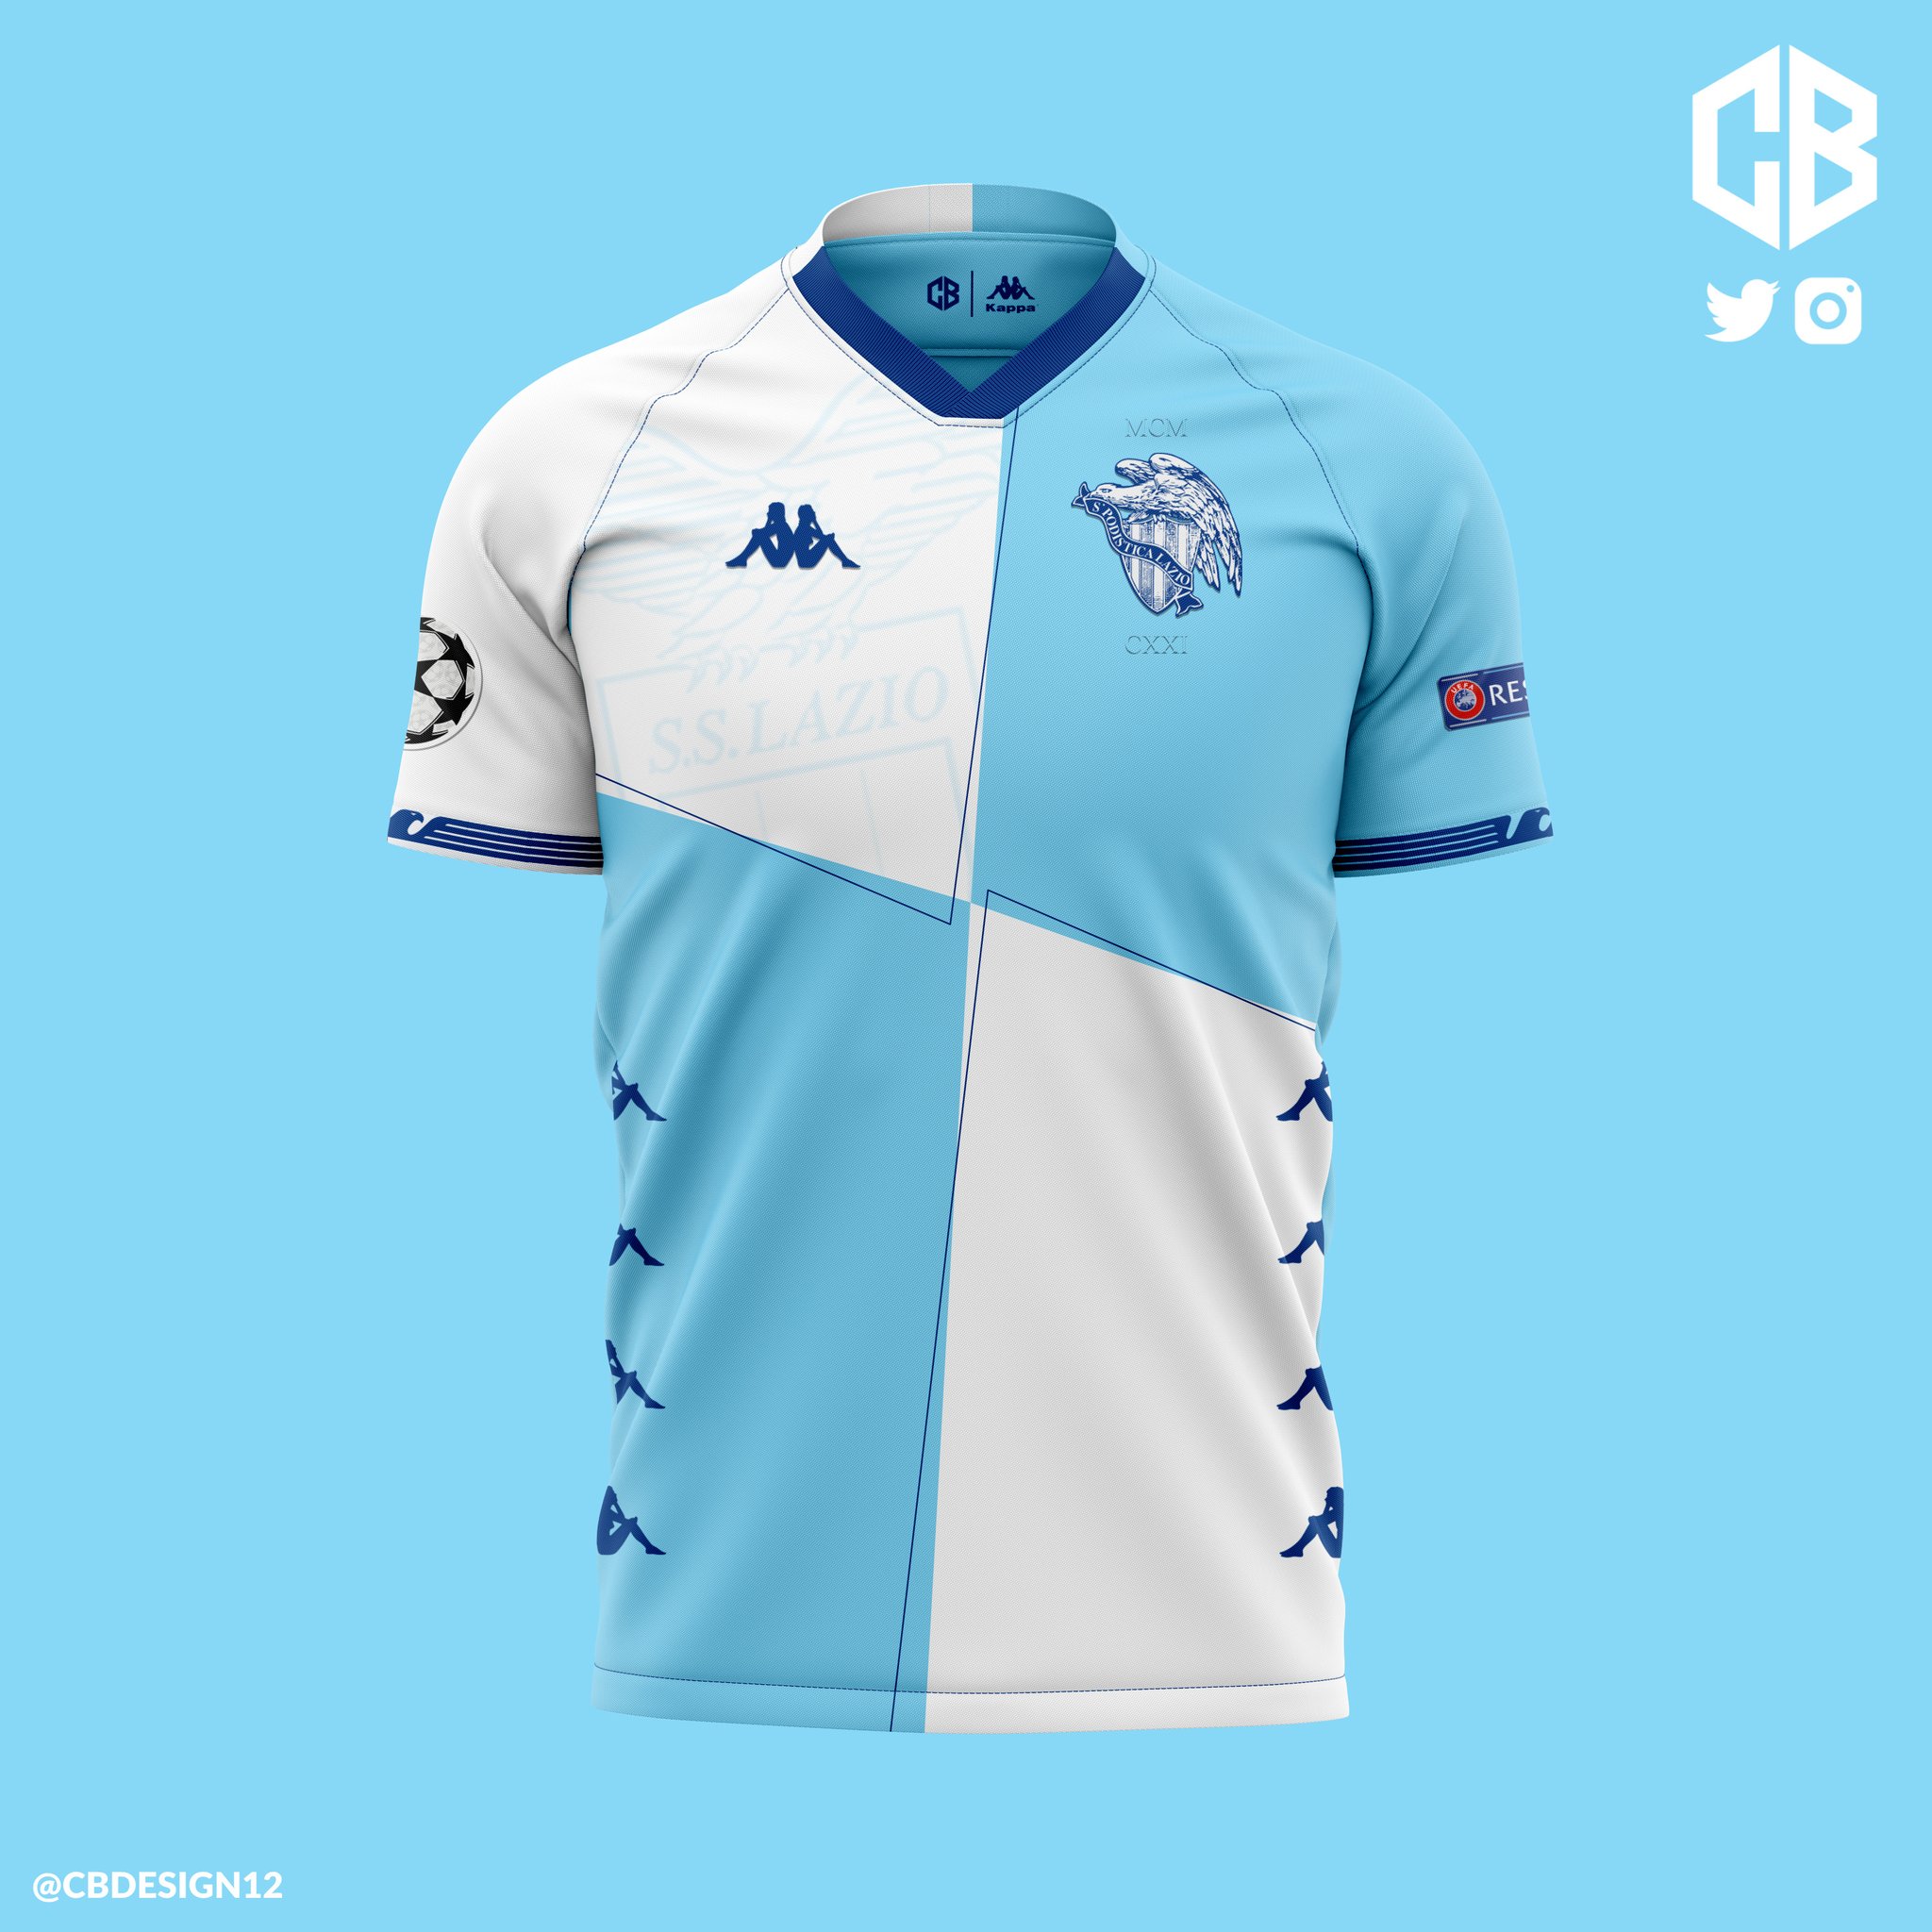 Van toepassing Voorkomen stok CB Design on Twitter: "✏️ SS Lazio | Fourth 👕 Kappa If you like it, please  🔄 and ❤. Thank you &amp; Forza Lazio! @OfficialSSLazio #Lazio #SSLazio  #SSL #CXXILazio #LaPrimaSquadraDellaCapitale #CmonEagles #Immobile #